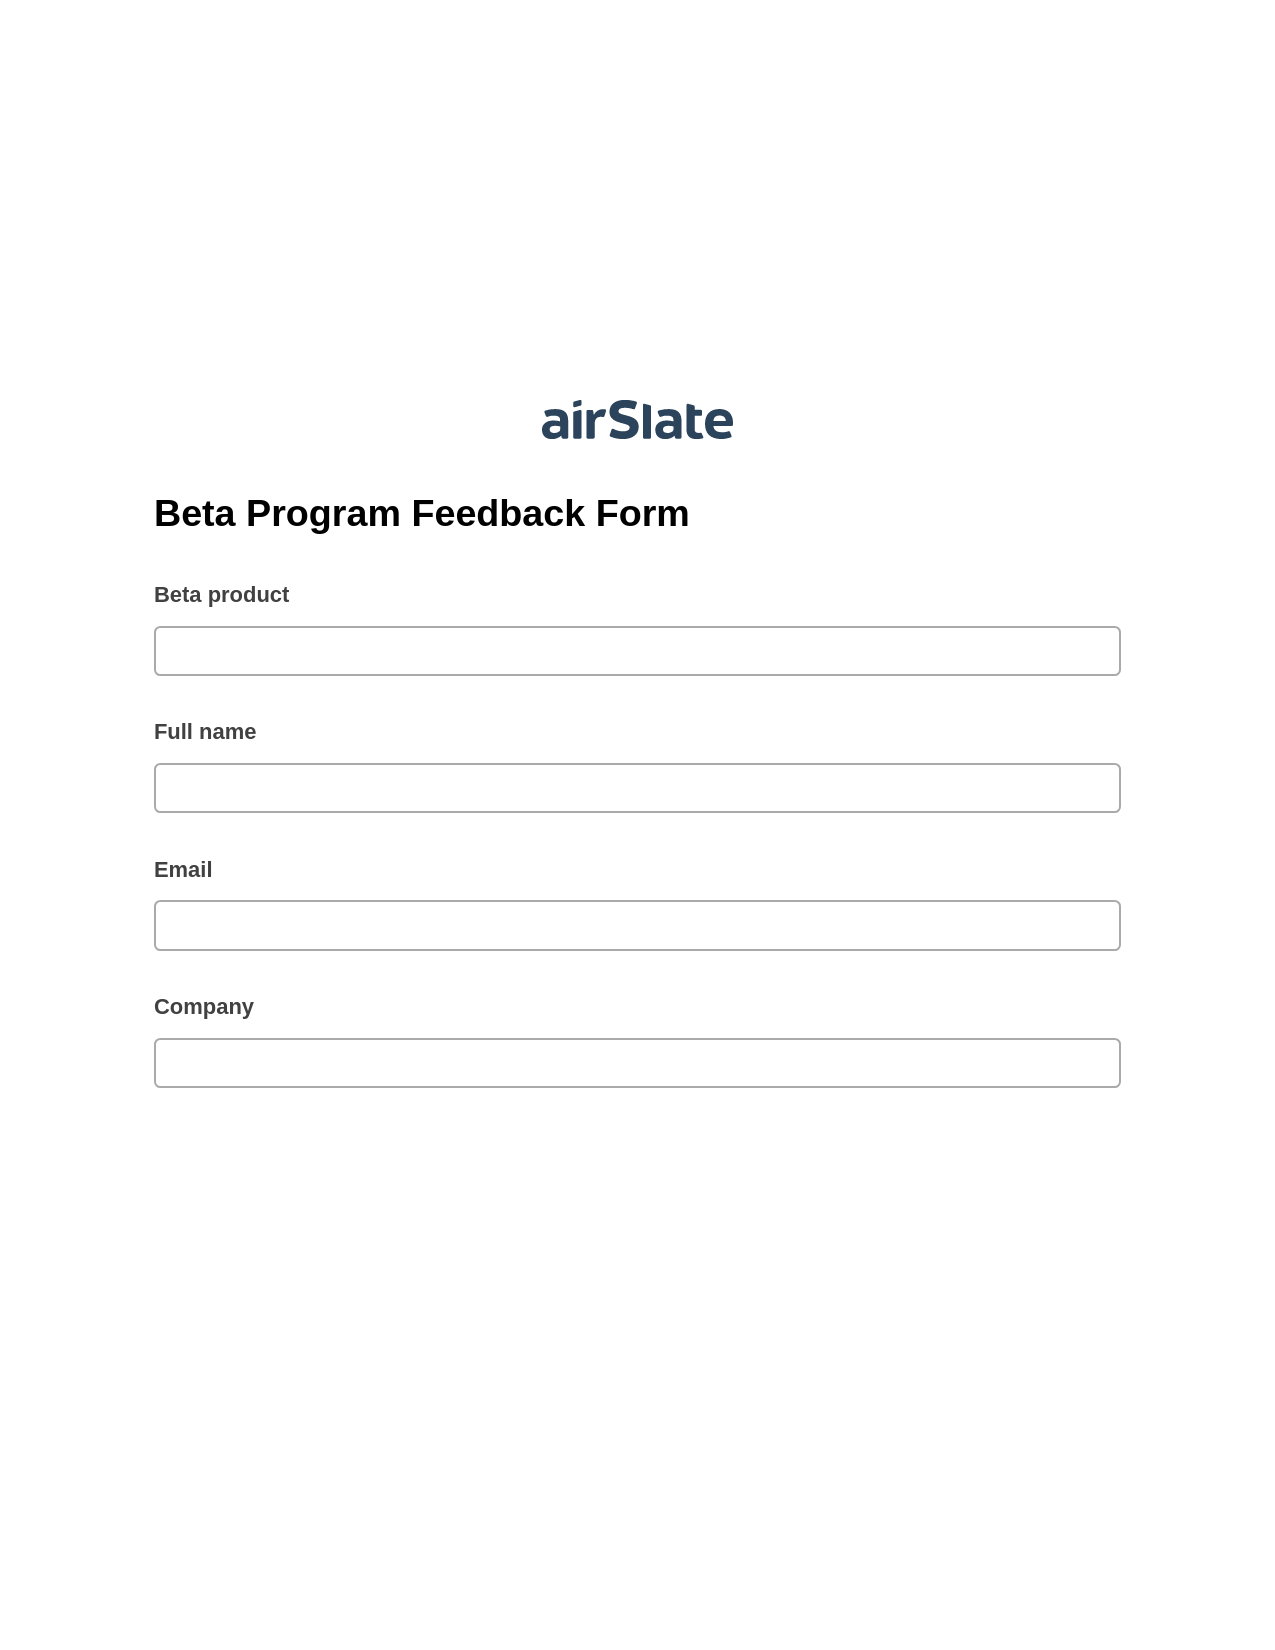 Multirole Beta Program Feedback Form Pre-fill from Excel Spreadsheet Bot, Send a Slate to Salesforce Contact Bot, Post-finish Document Bot